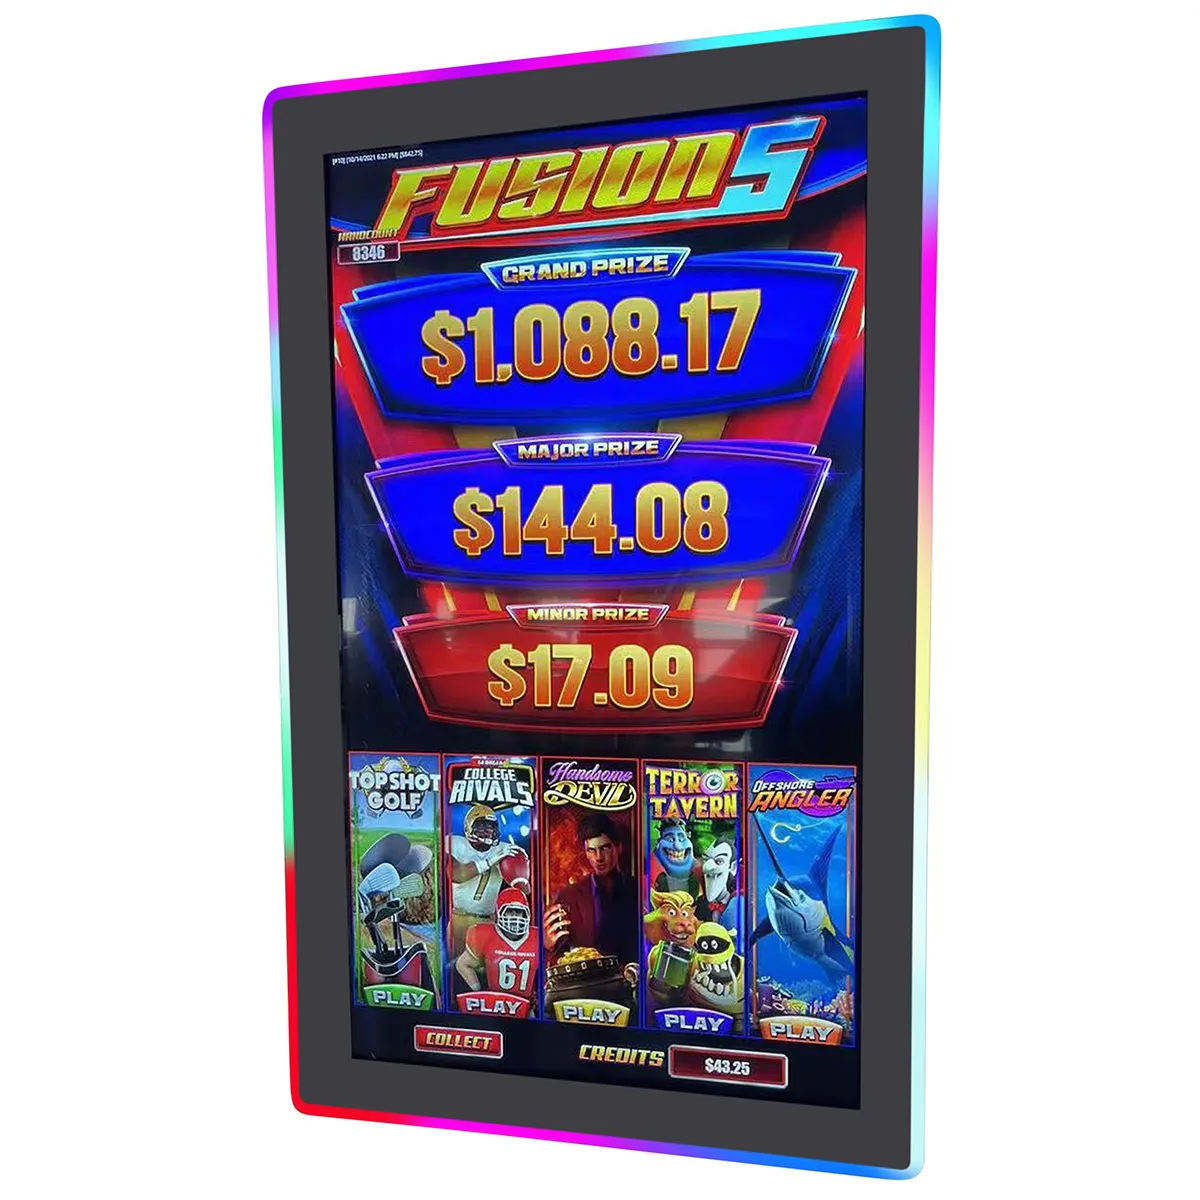 led light 3M or ELO 32 43 inch touch screen monitor for JINSE DAO SUPER LOCK Makin bacon coin operated games